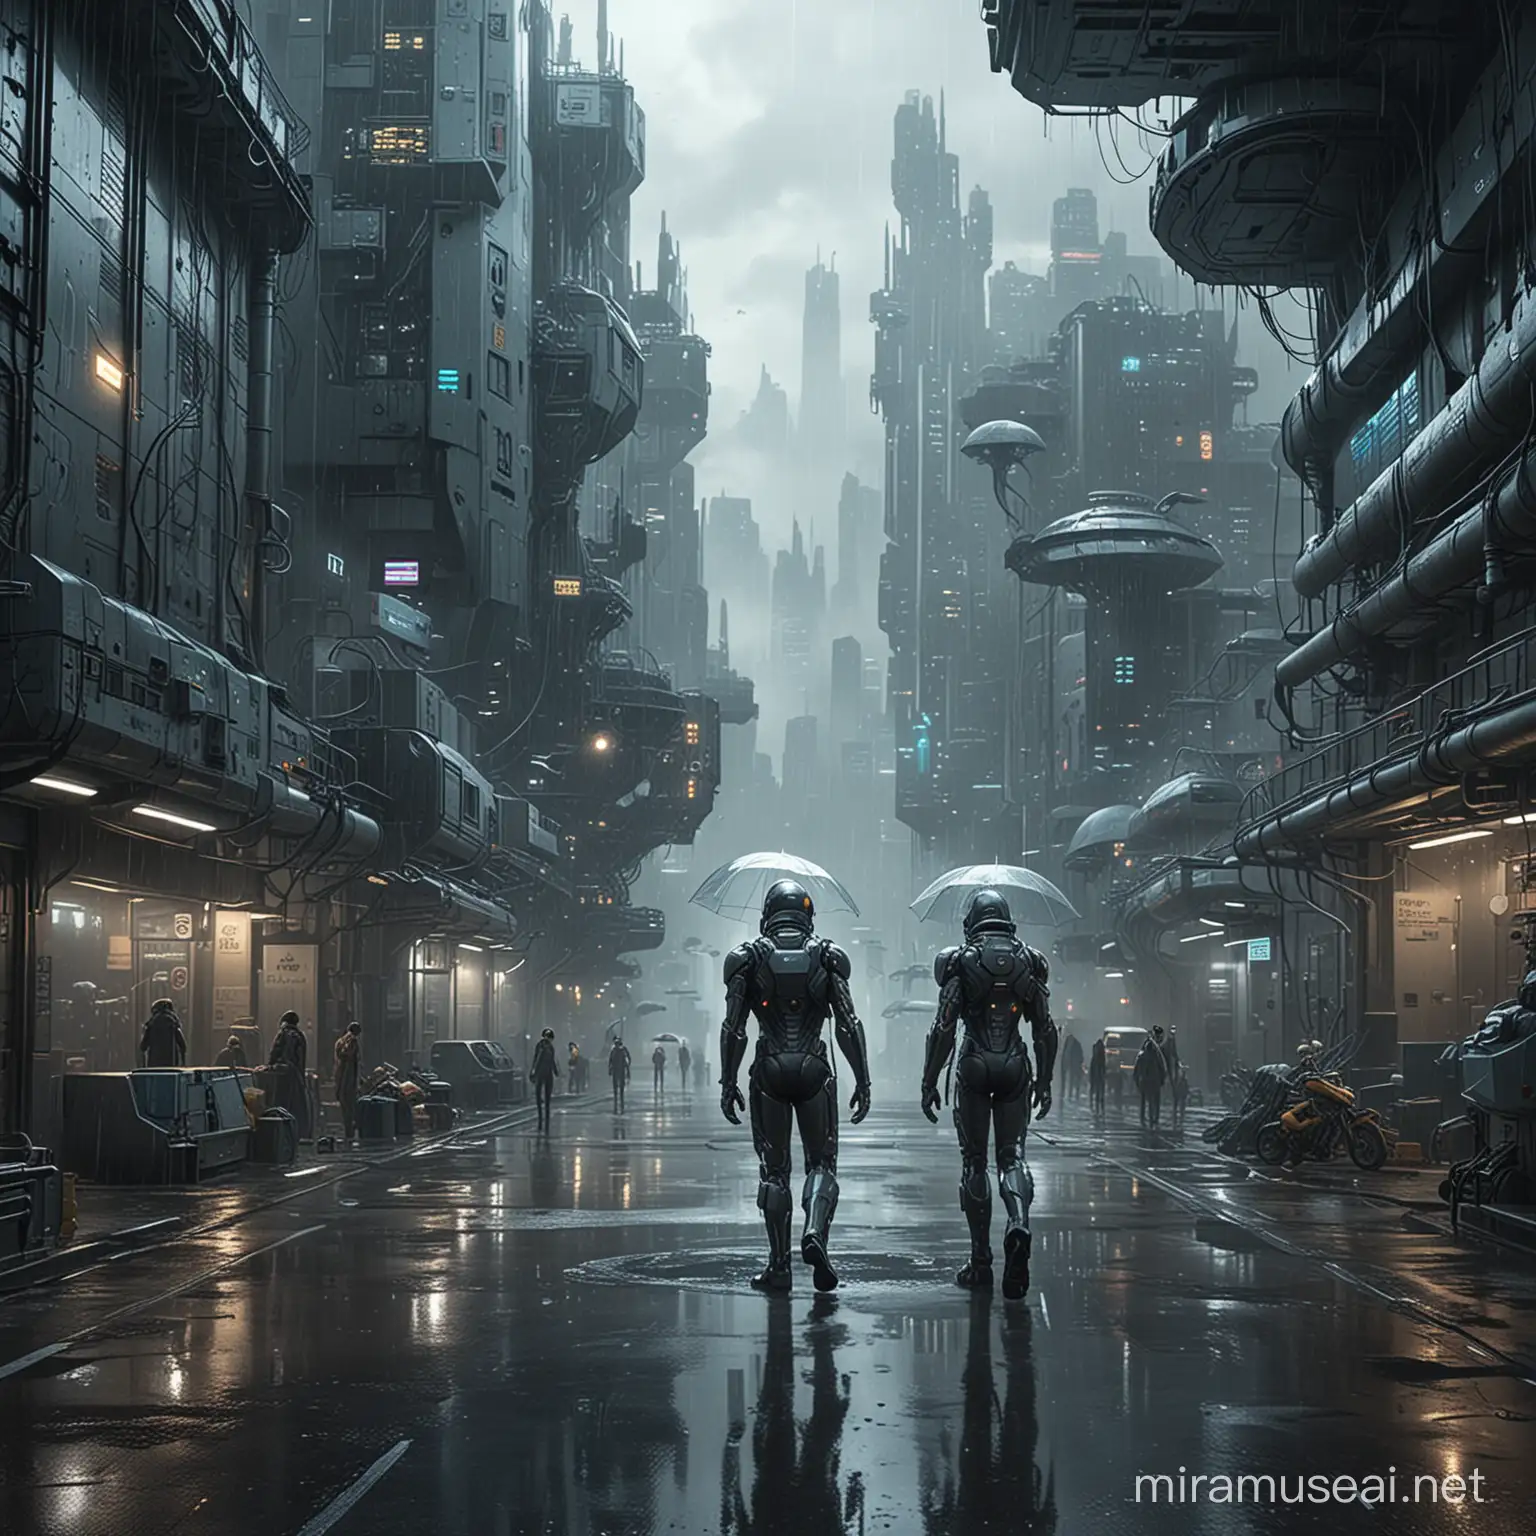 a futuristic city where humanoids do not enjoy rain and have superpowers working in a futuristic laboratory